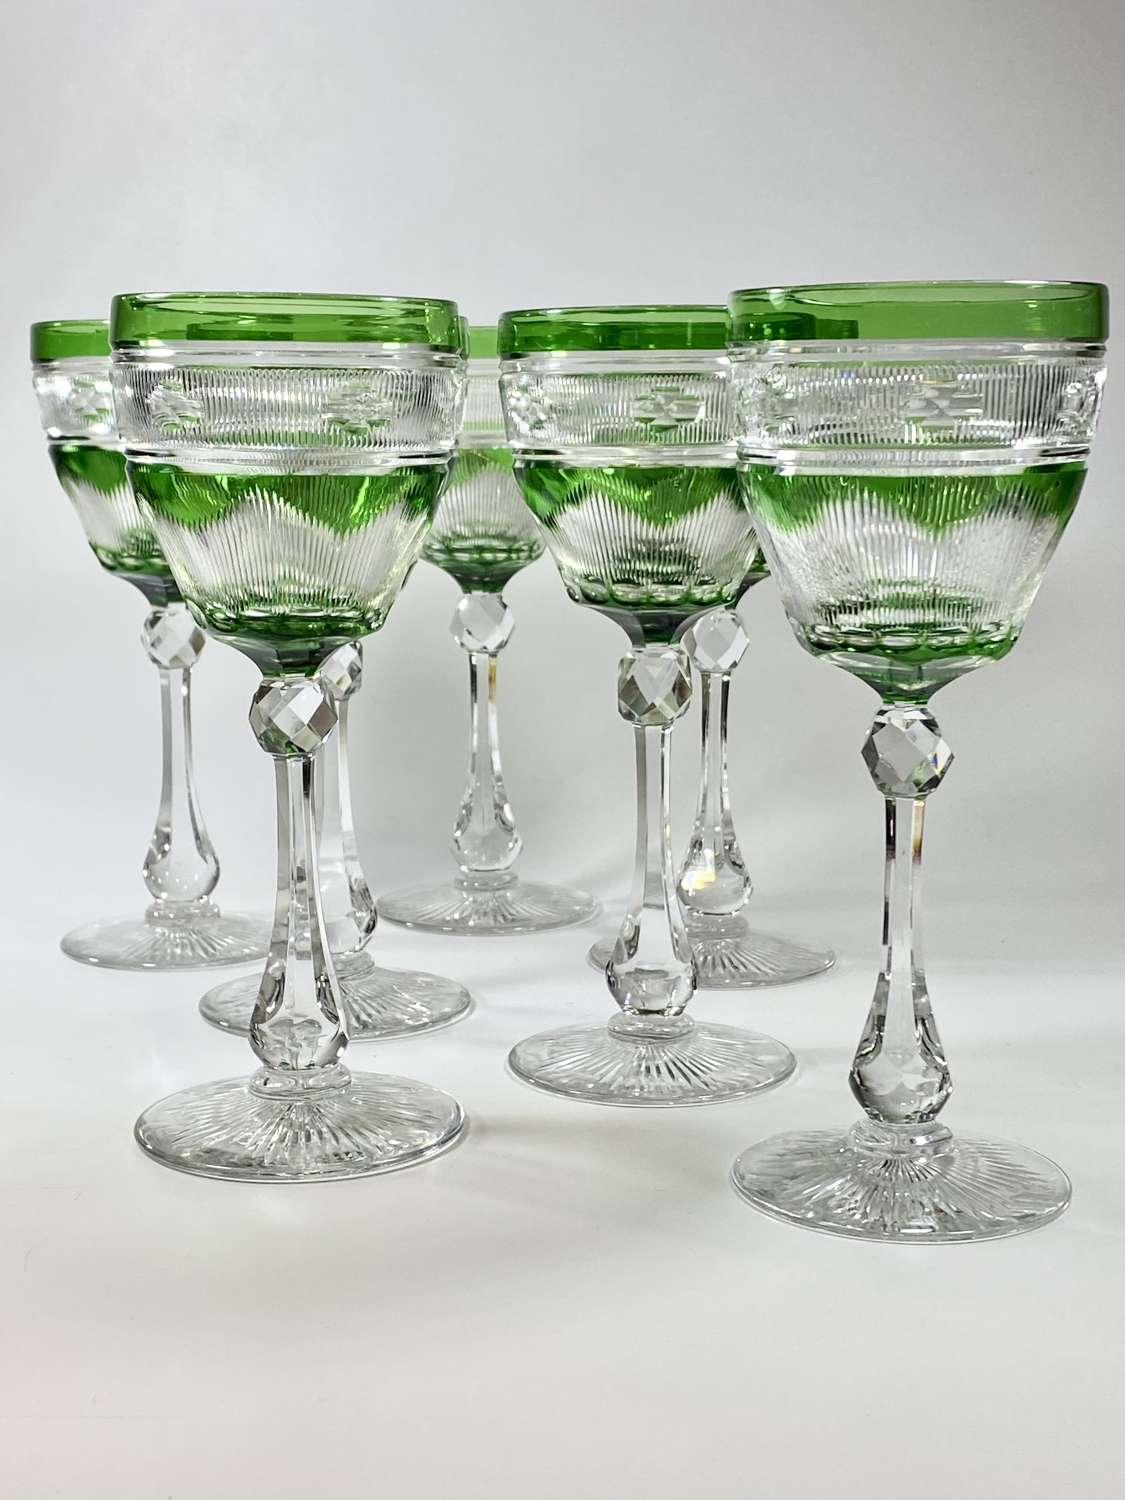 Exceptional set of Victorian cut to clear crystal wine glasses